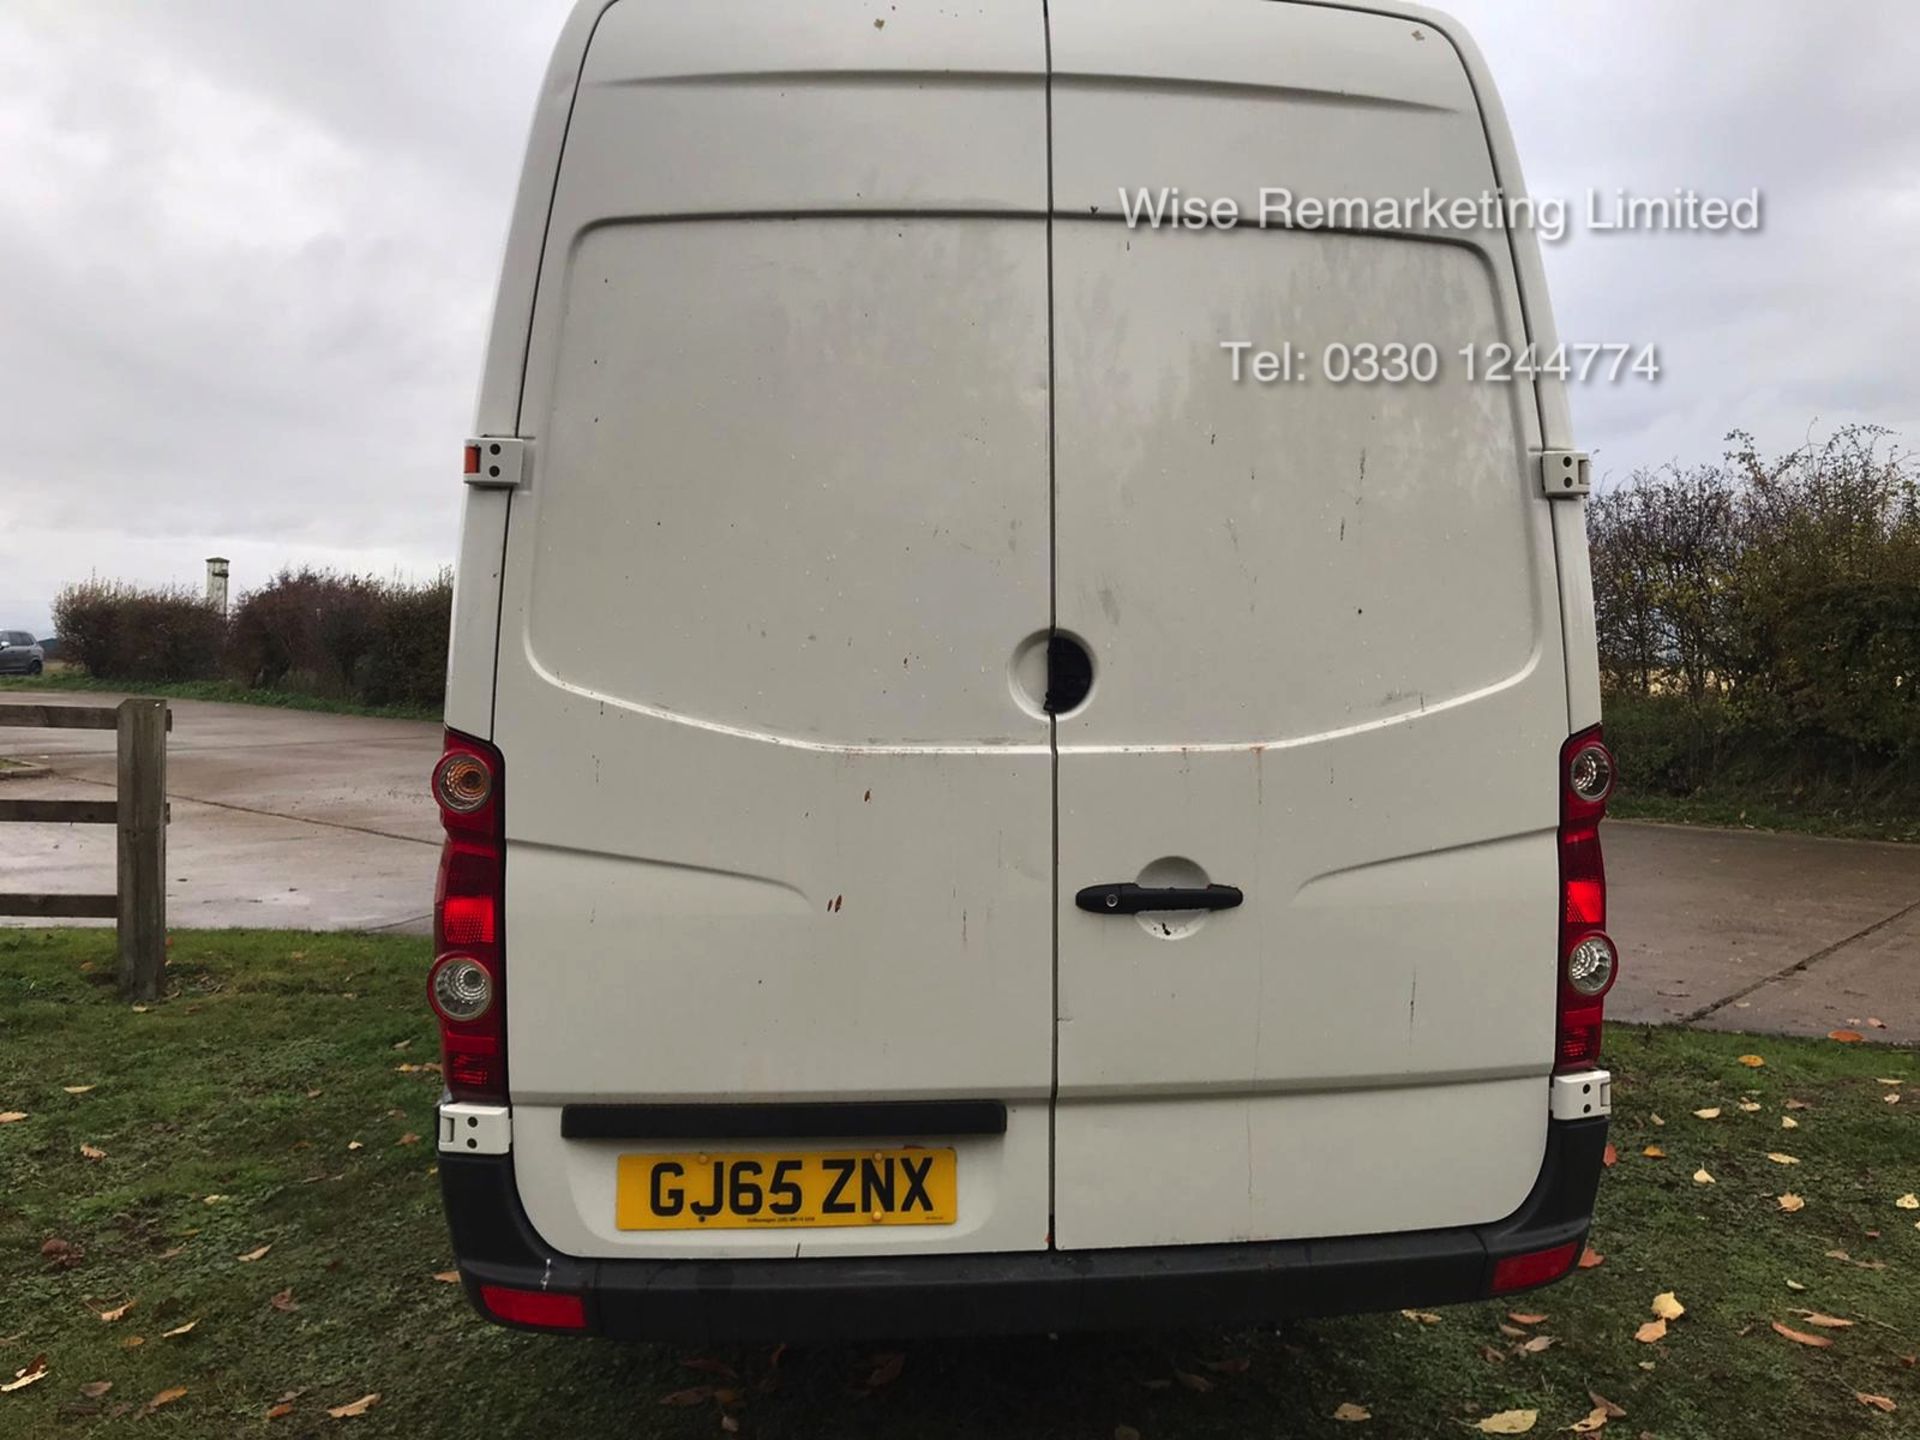 Volkswagen Crafter CR35 Startline 2.0l TDi - LWB - 2016 Model -1 Keeper From New - Service History - Image 4 of 15